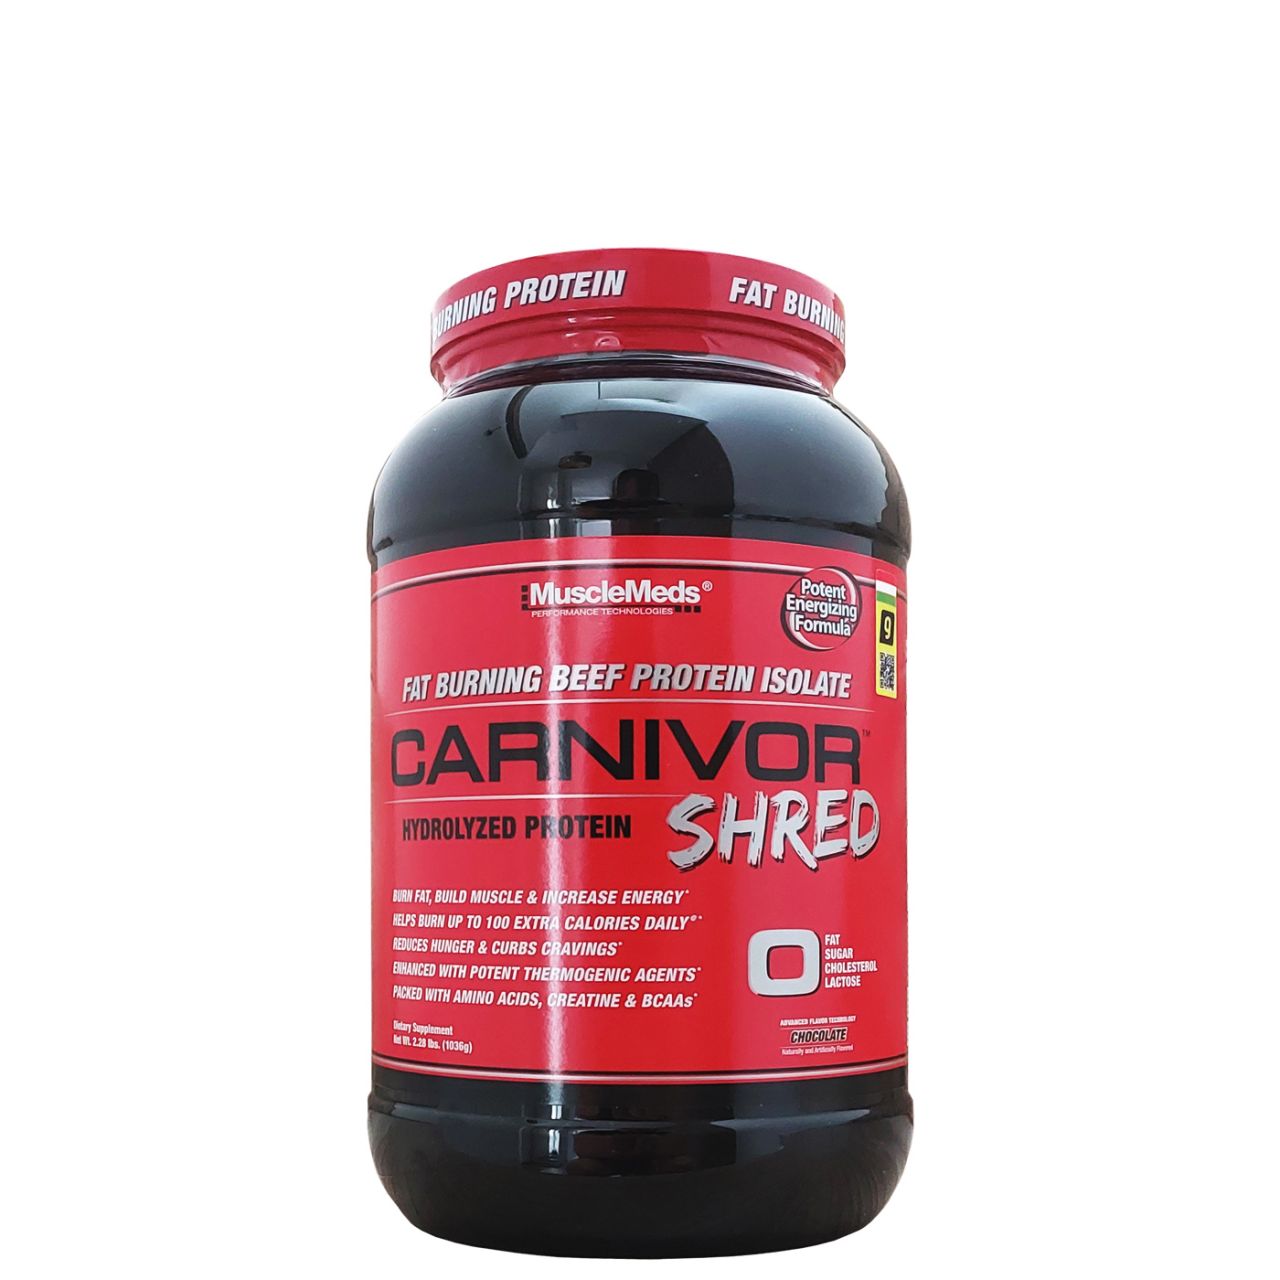 MUSCLEMEDS - CARNIVOR SHRED - FAT BURNING BEEF PROTEIN ISOLATE - 2,28 LBS - 1036 G